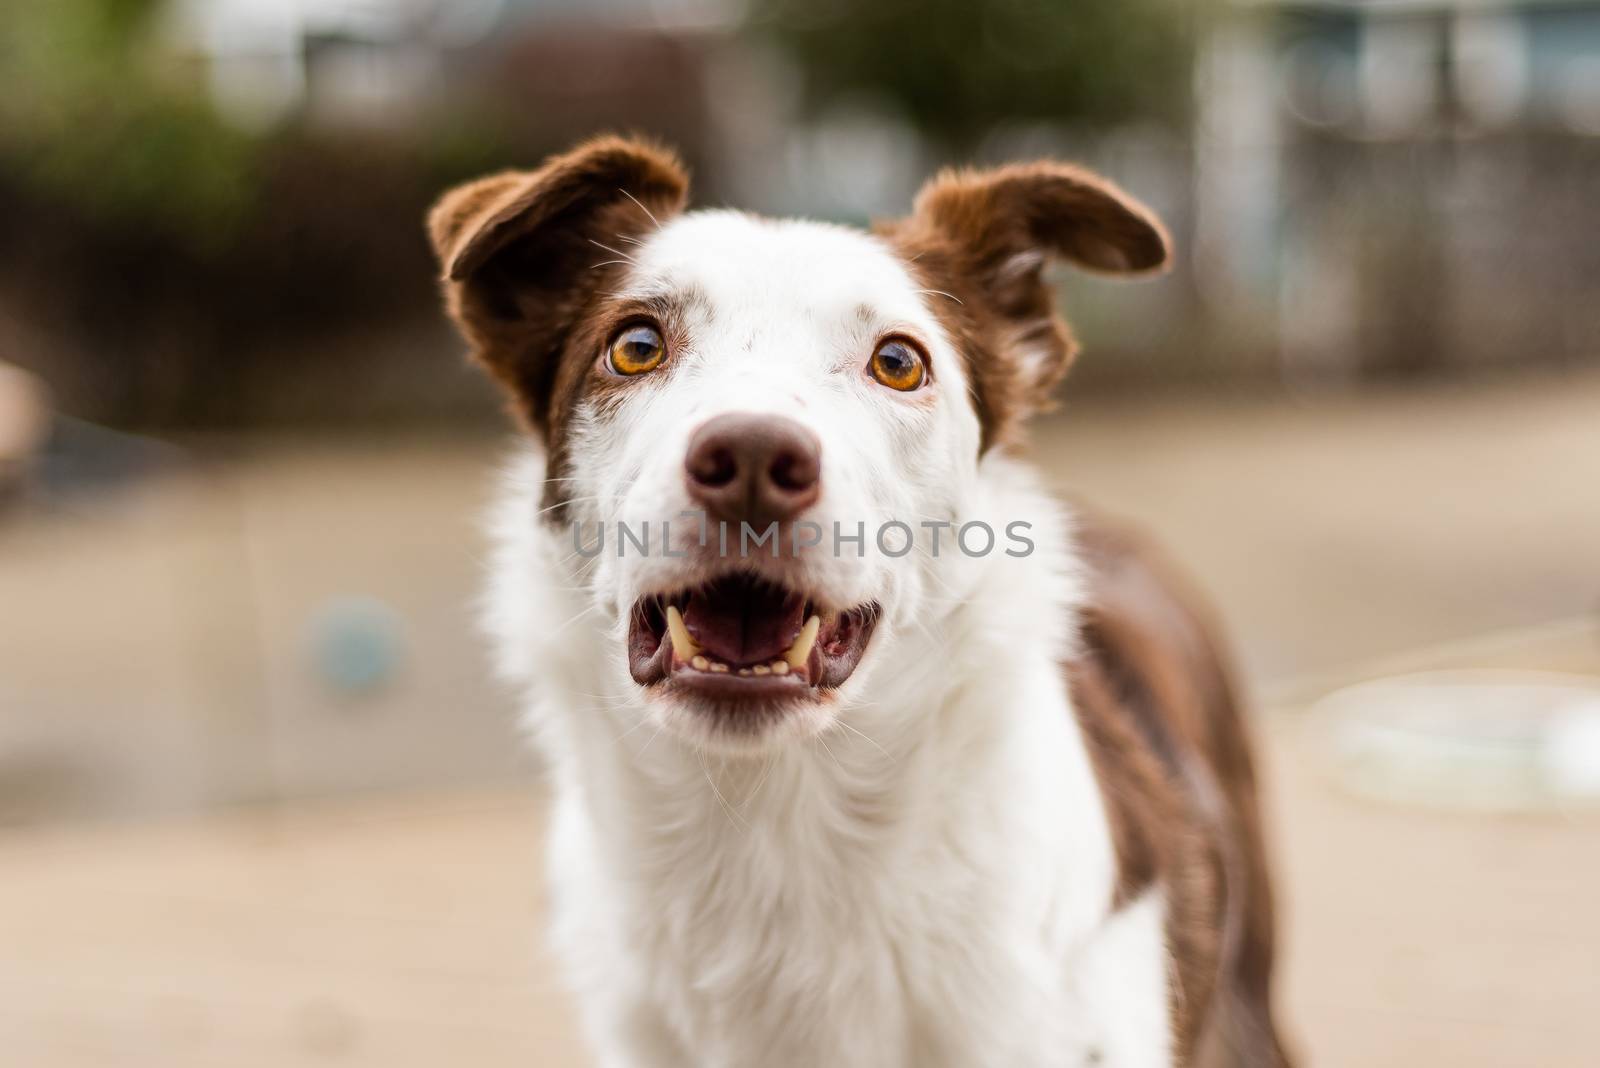 Outdoor pet photography head shot of border collie dog, focus on eyes